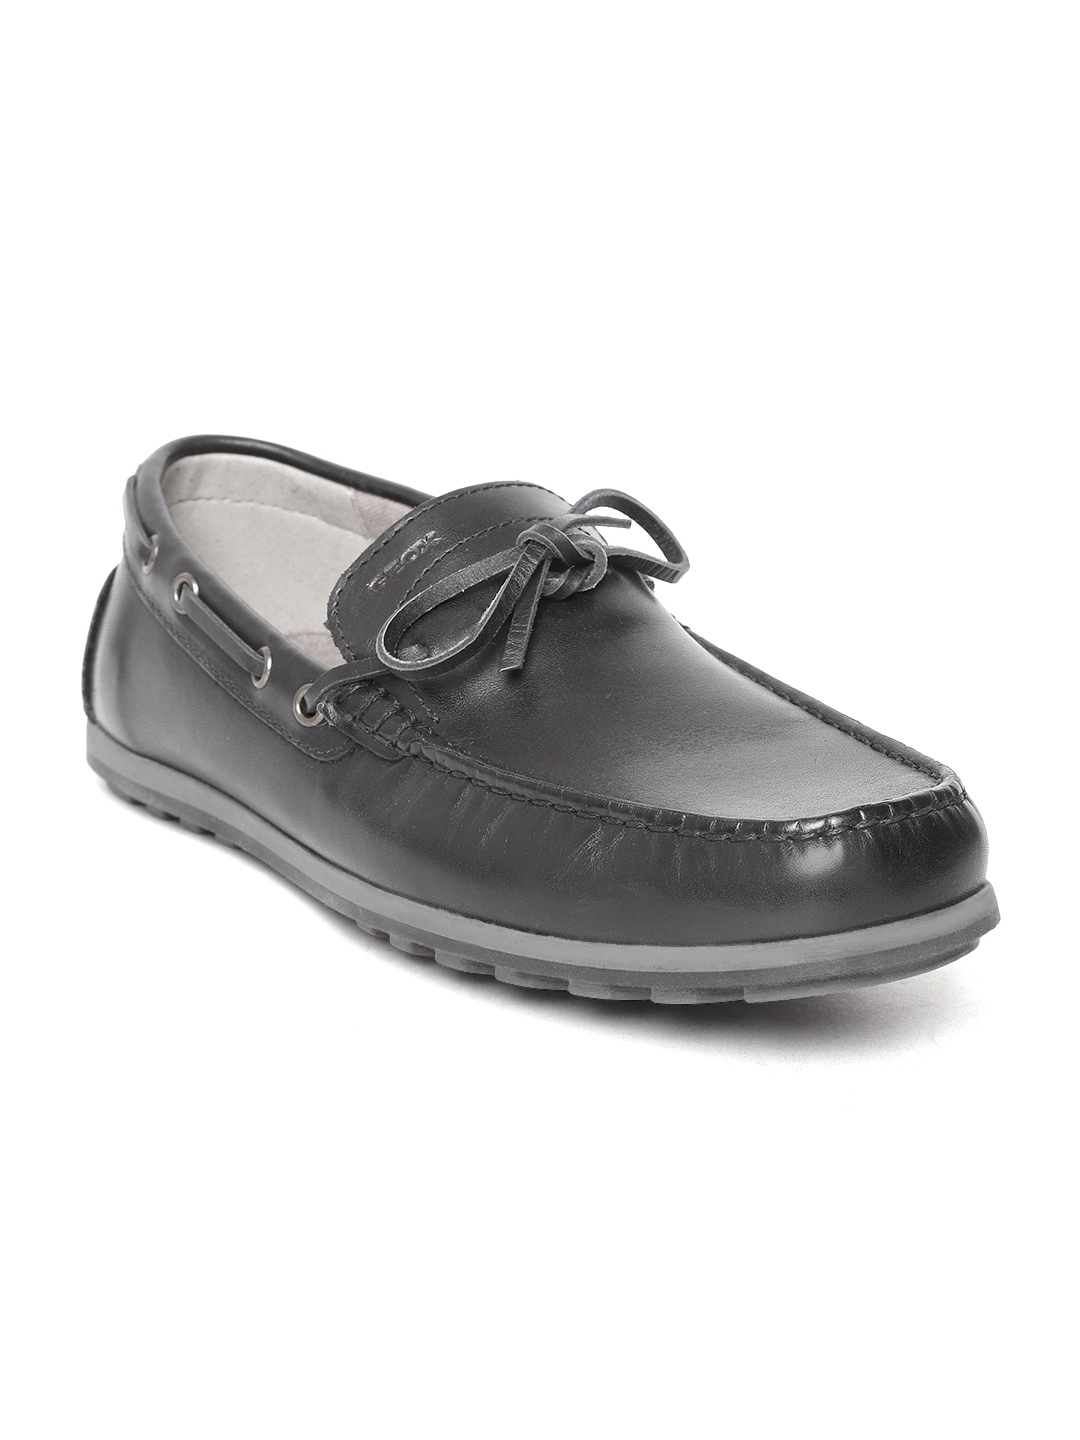 geox mens boat shoes